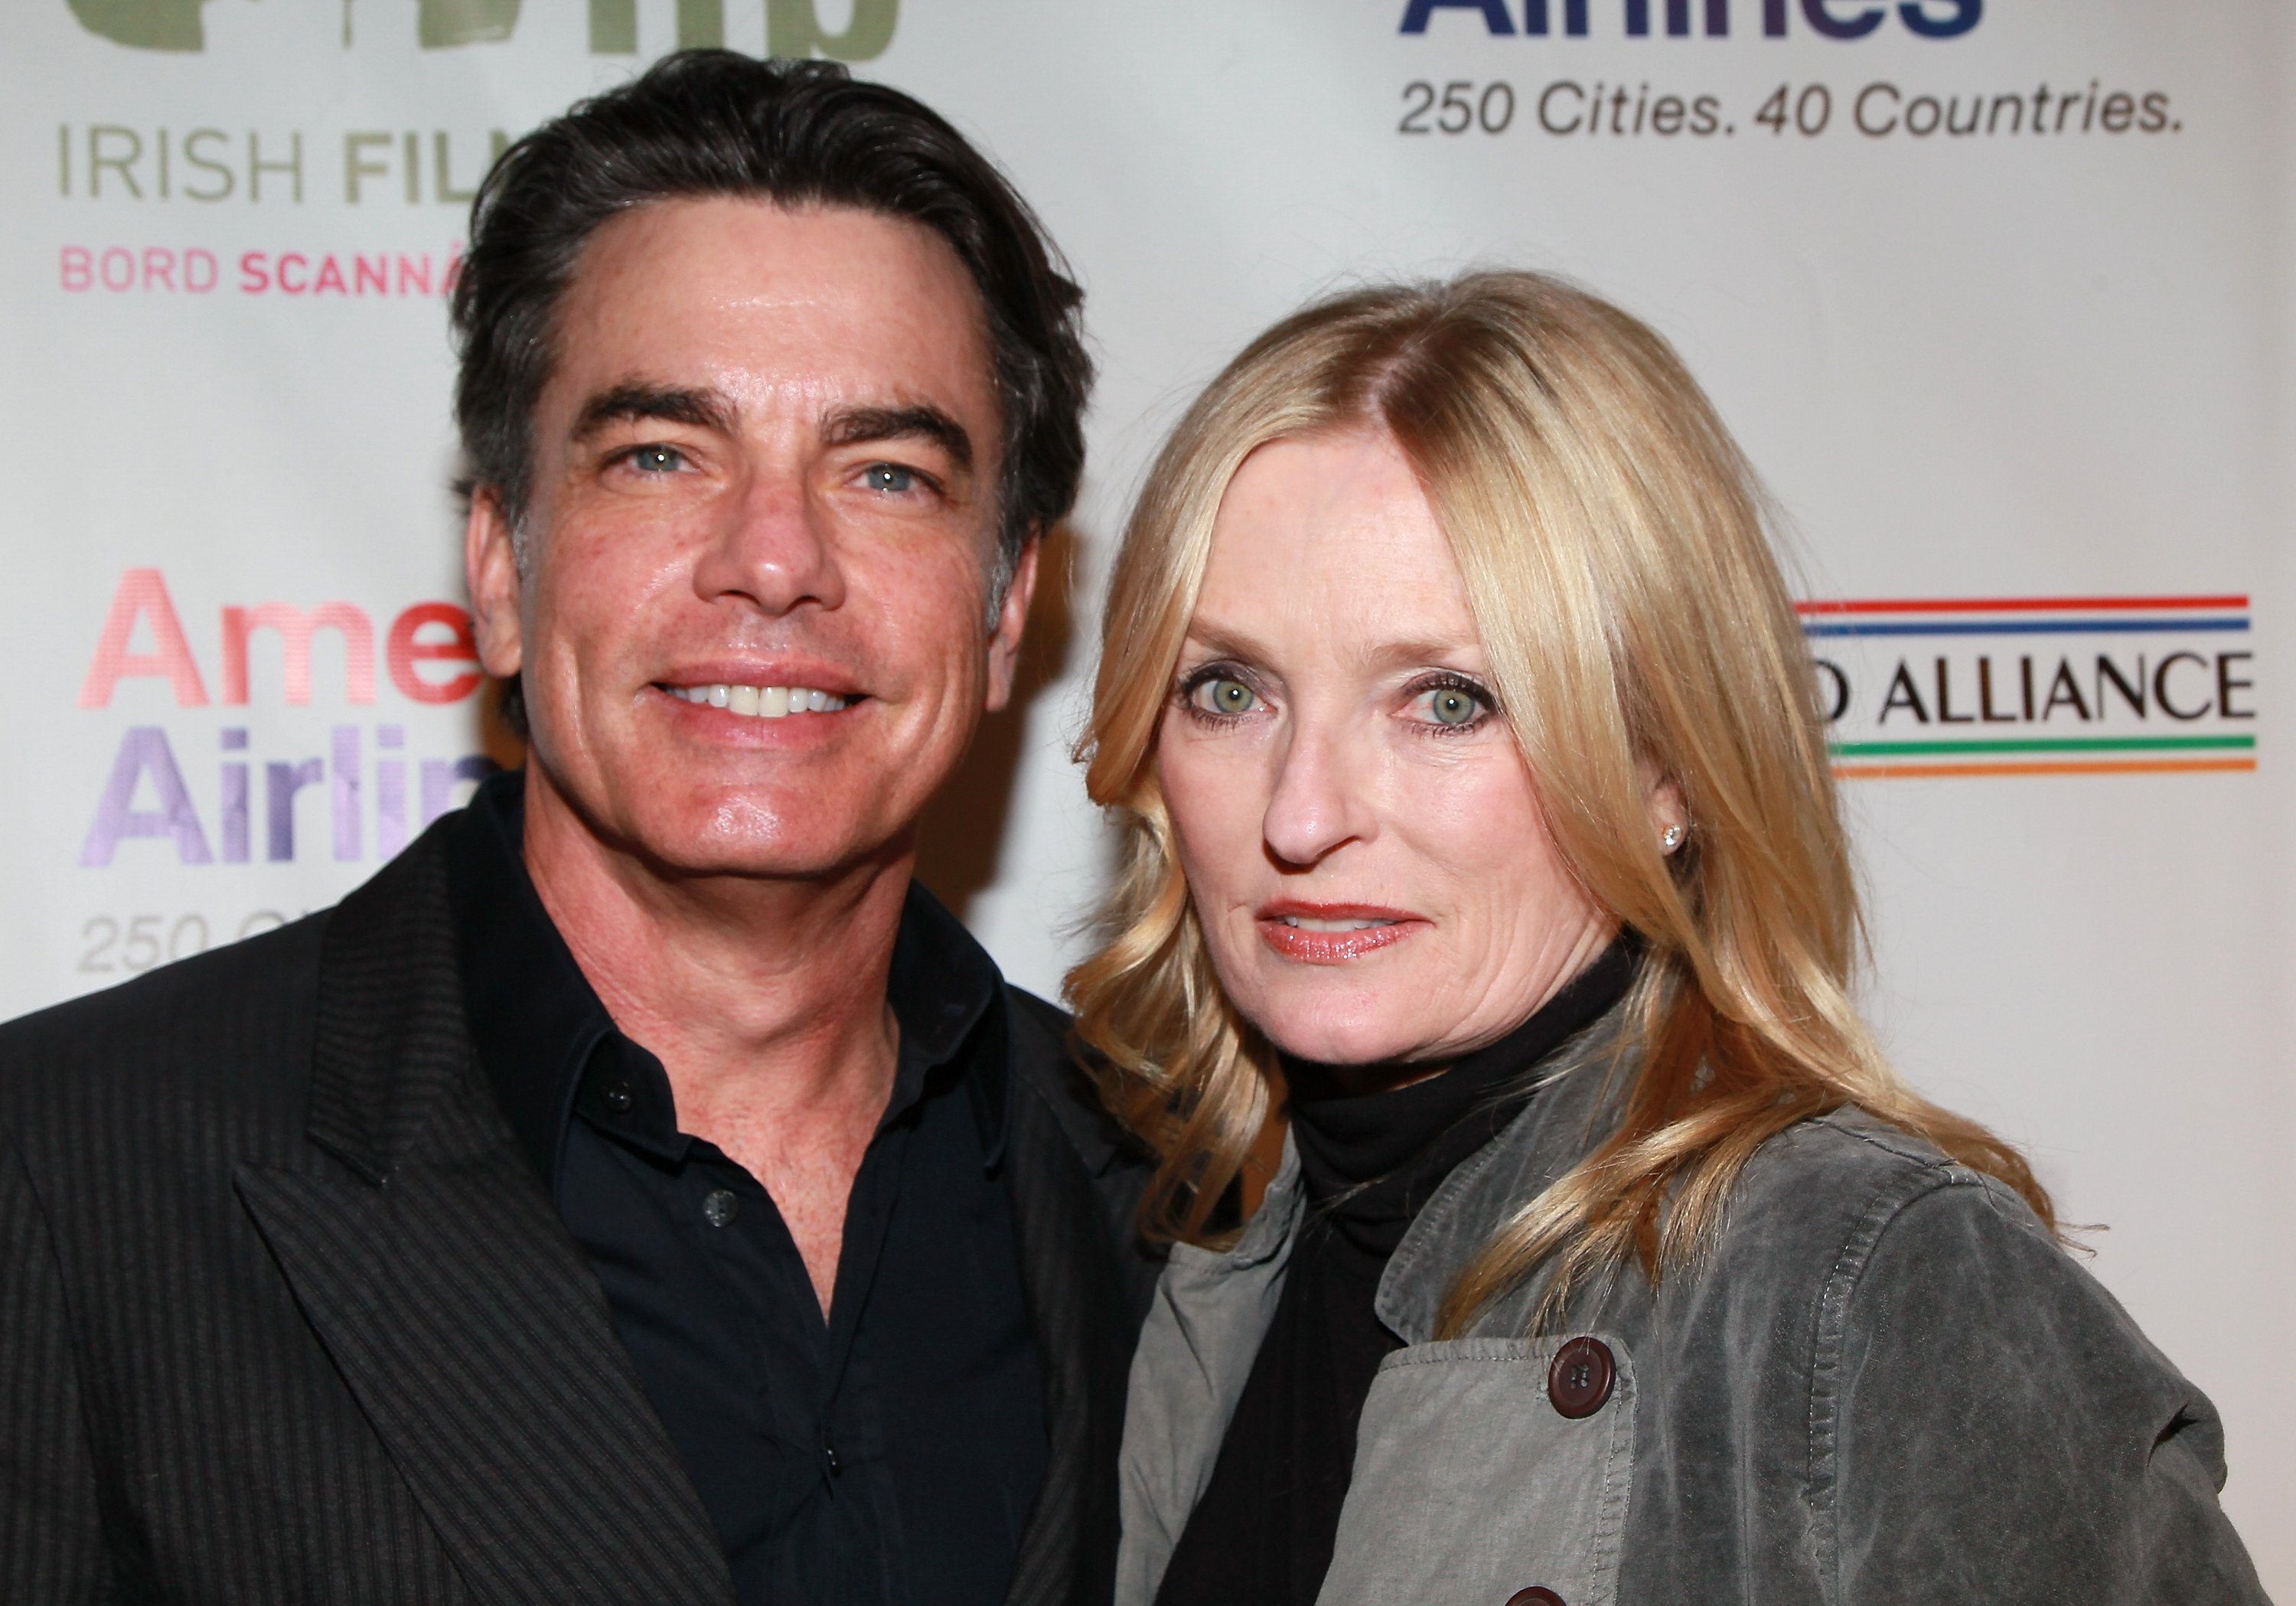 Peter Gallagher and Paula Harwood at the 6th annual "Oscar Wilde: Honoring the Irish in Film" pre-Academy Awards party hosted at the Ebell Club of Los Angeles in California on February 24, 2011. | Source: Getty Images